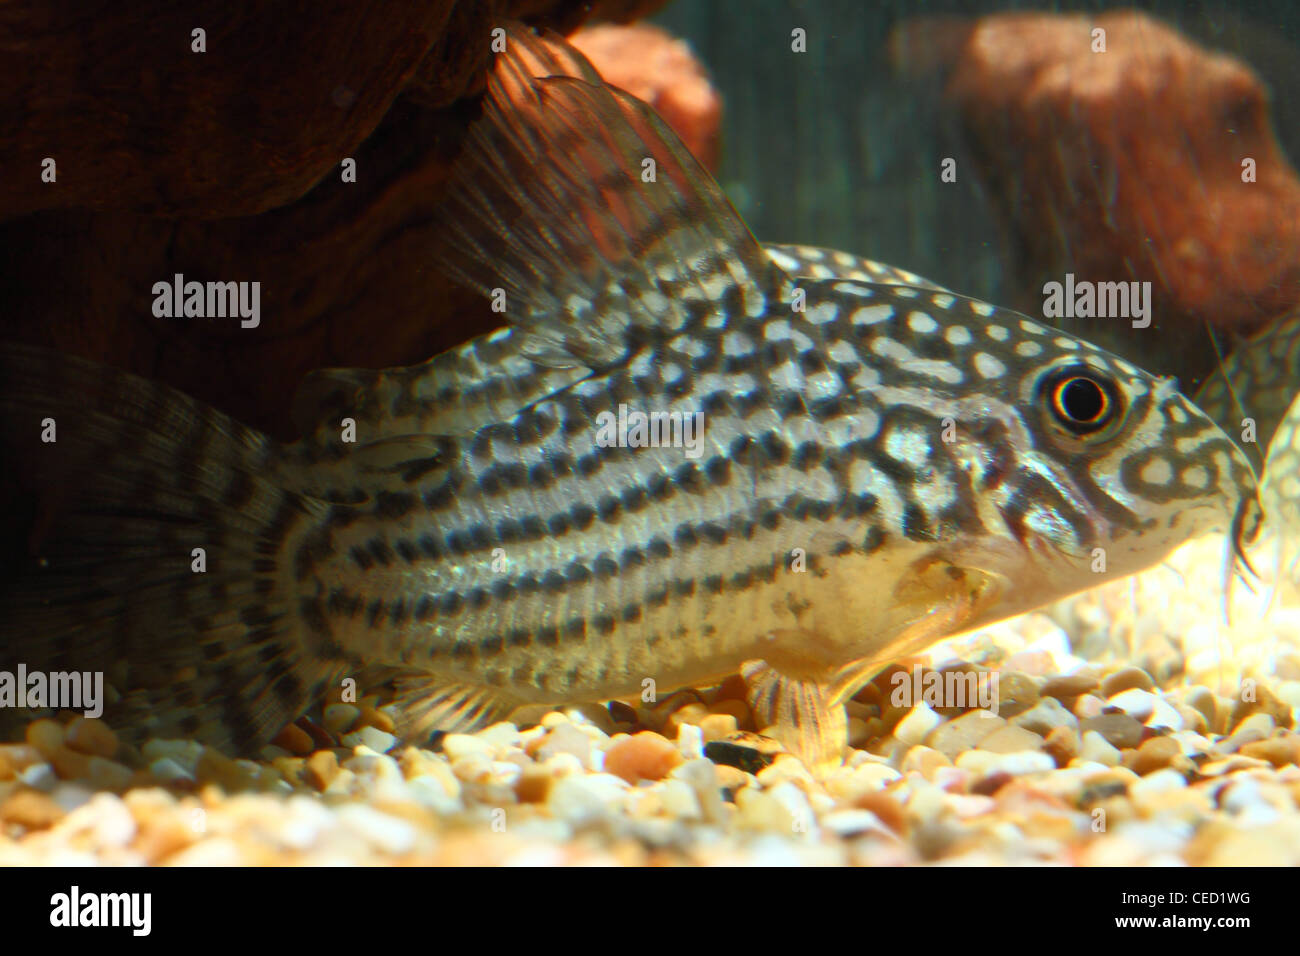 A dotted white and gray fish (genus corydoras) in a tank Stock Photo